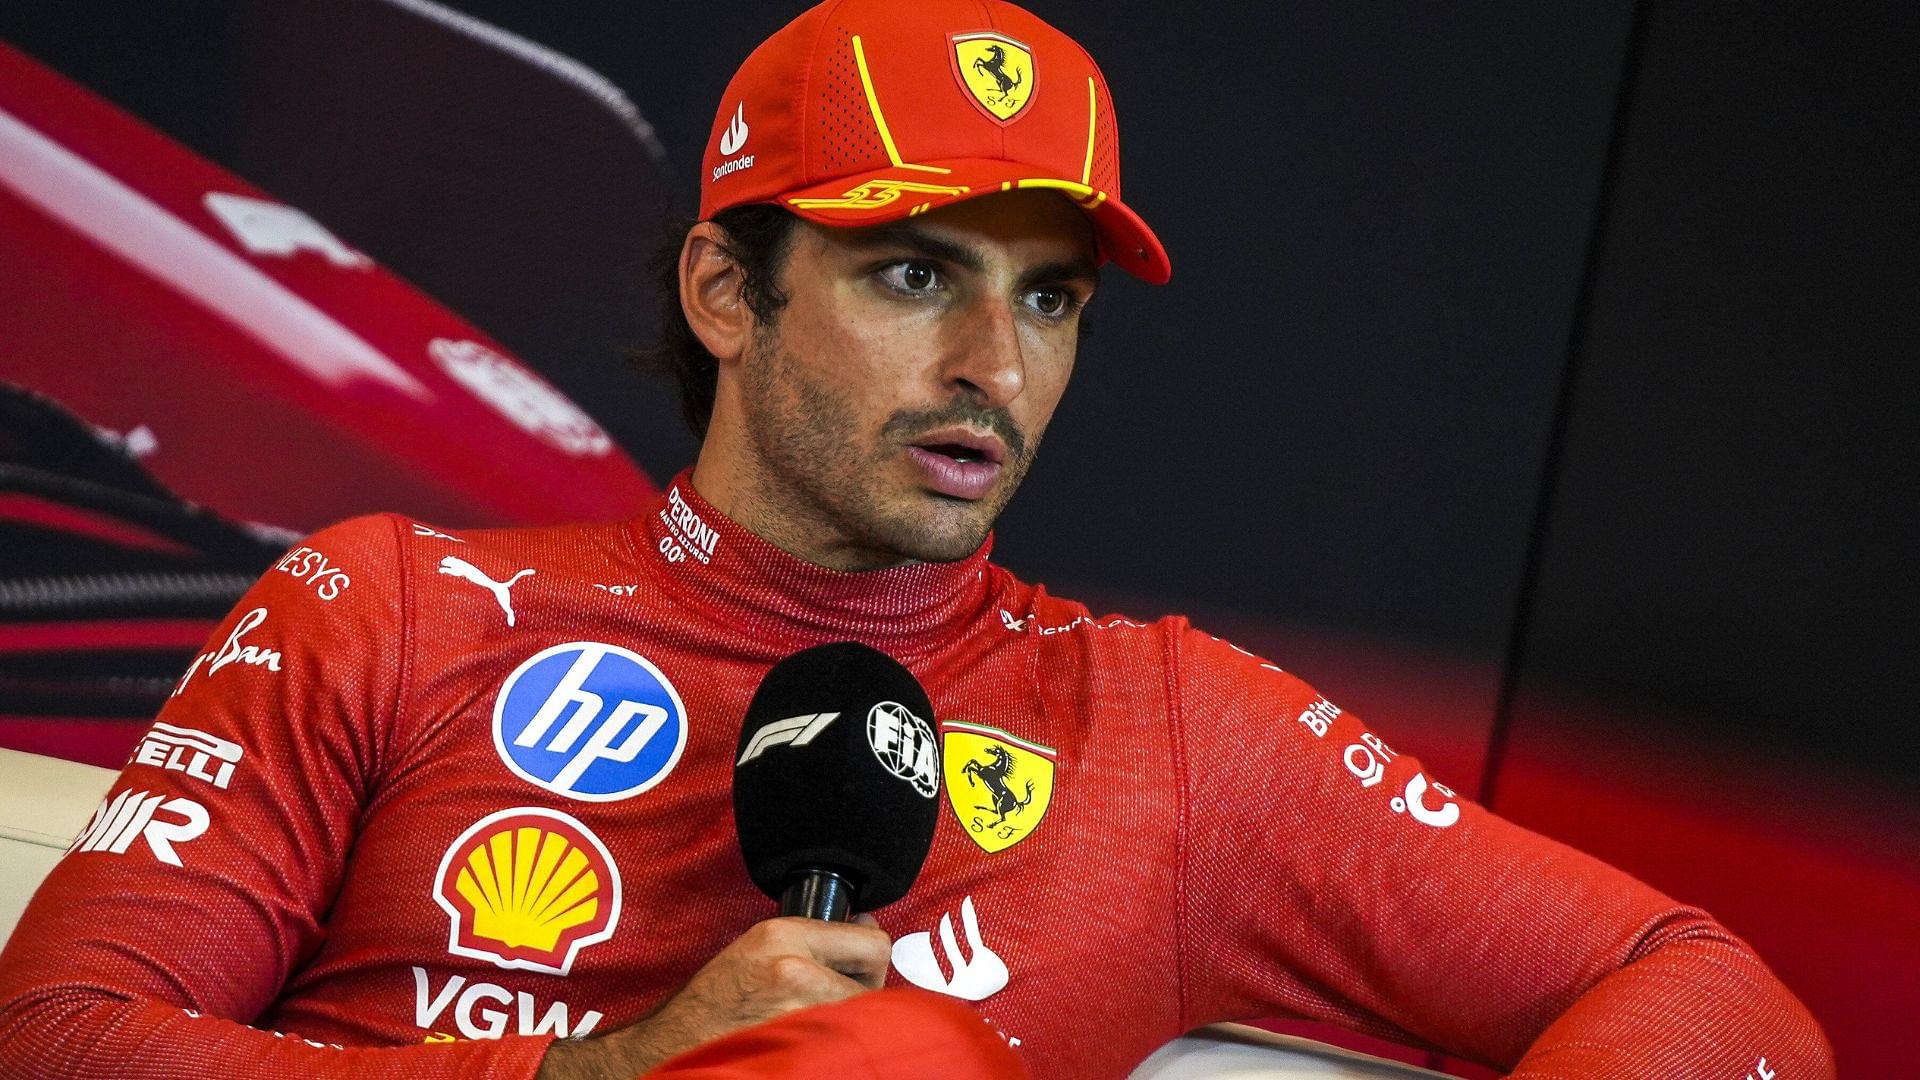 Carlos Sainz Sets His Priority Straight for the Monaco GP After Charles Leclerc Grabs P1